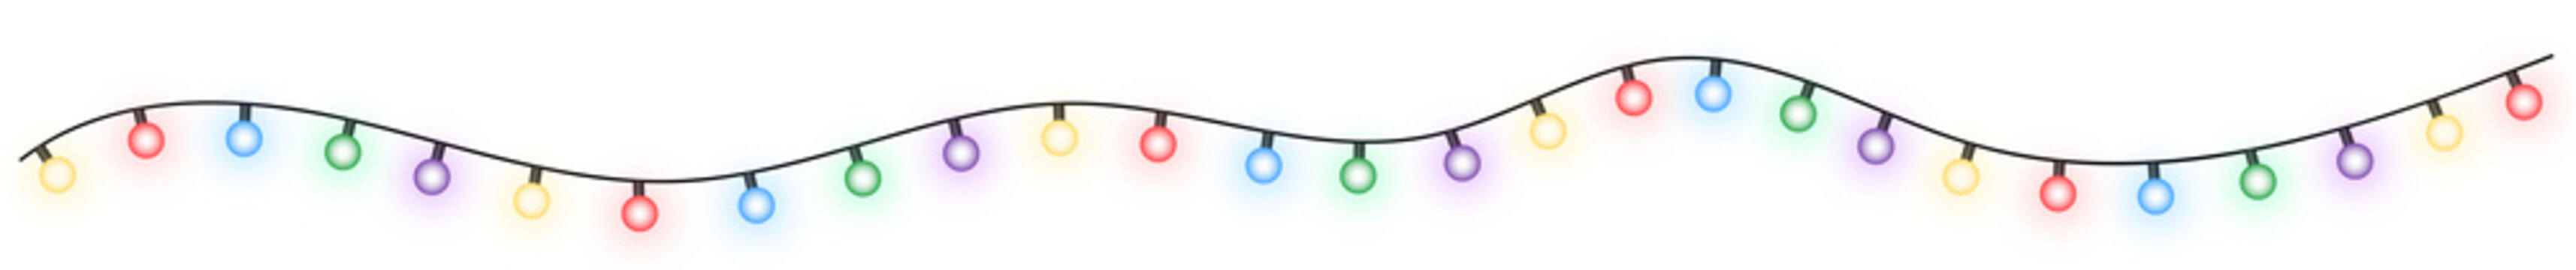 Christmas decoration light garland with multicolored bulbs. Holiday decor. Realistic element for festive design. Vector illustration